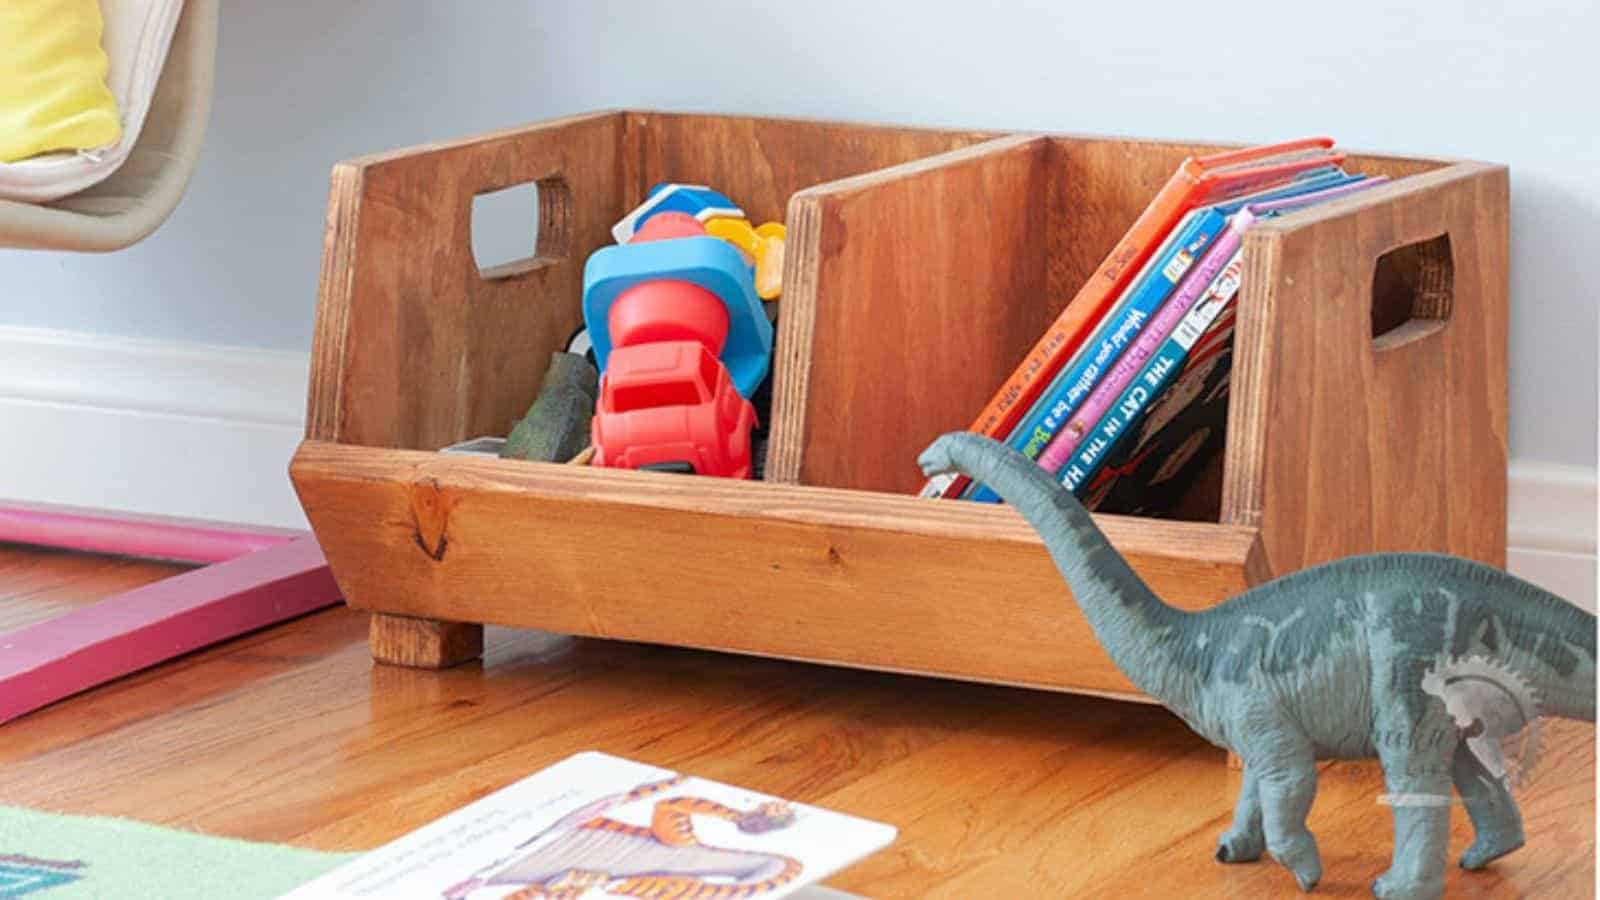 <p>This DIY divided storage bin is a versatile project. Use it to store books, toys, vegetables, or anything else you need. It’s an easy beginner woodworking project that can be made with scrap plywood and just three tools! <a href="https://www.anikasdiylife.com/diy-divided-produce-storage-bin/">Plans and tutorial here to make your own!</a></p>